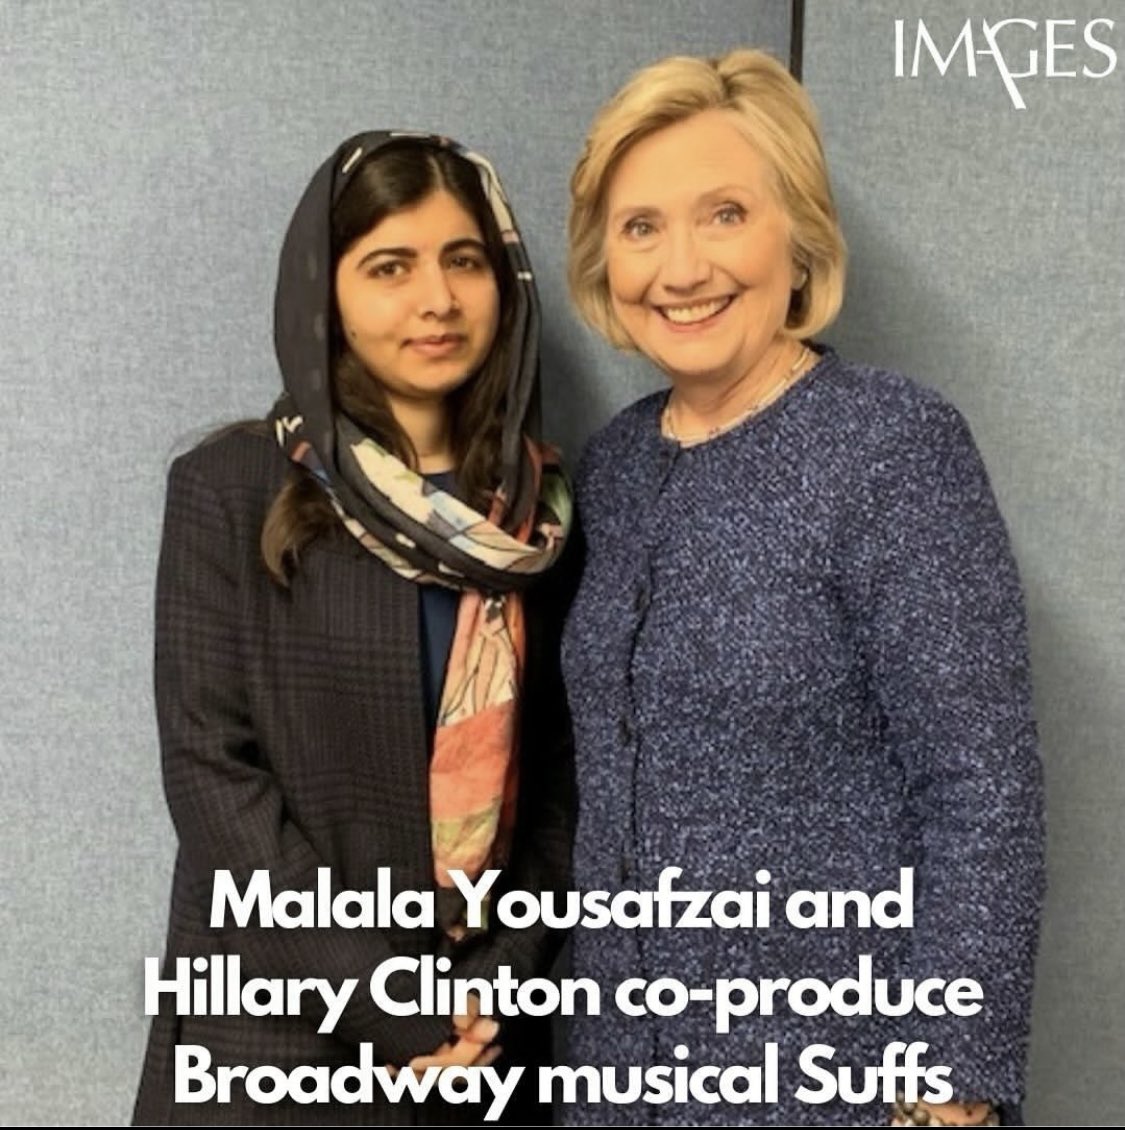 Talk about a fall from grace, of all the people to collaborate with! First Apple+ and now Clinton. No wonder we haven’t heard a peep from Malala on Gaza.